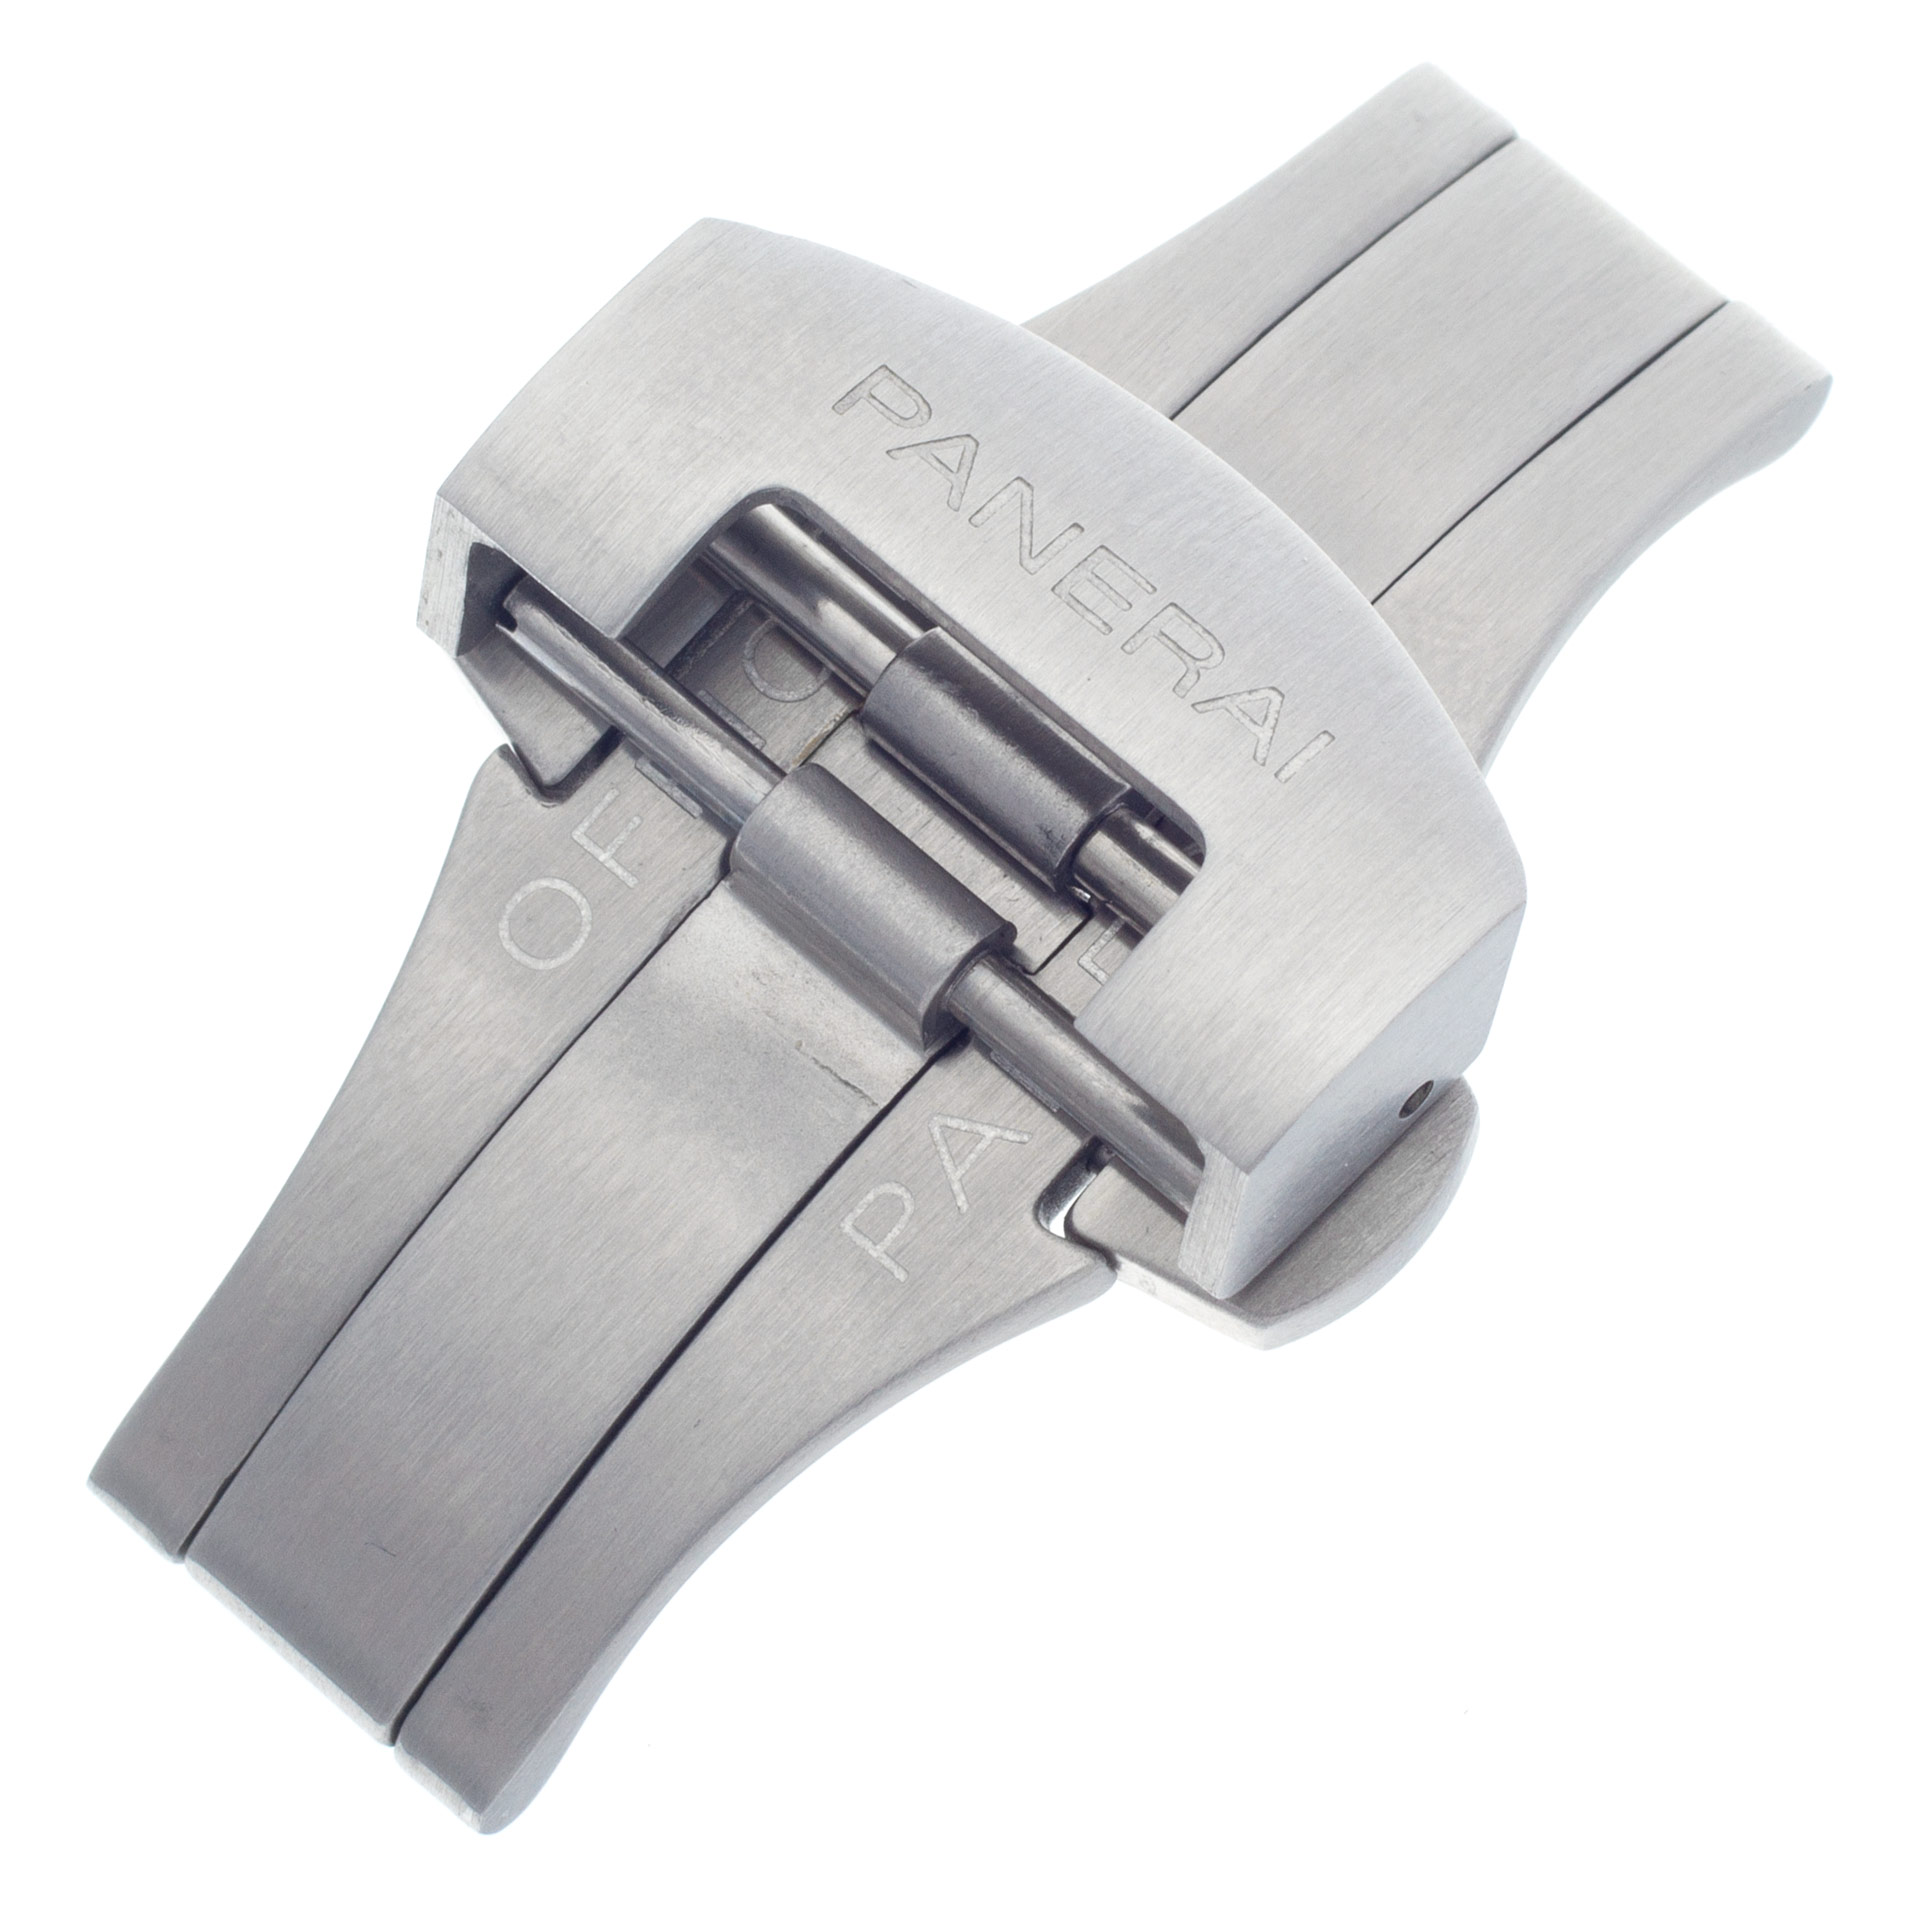 Panerai stainless steel deployment buckle complete with steel bar (22mm). image 1